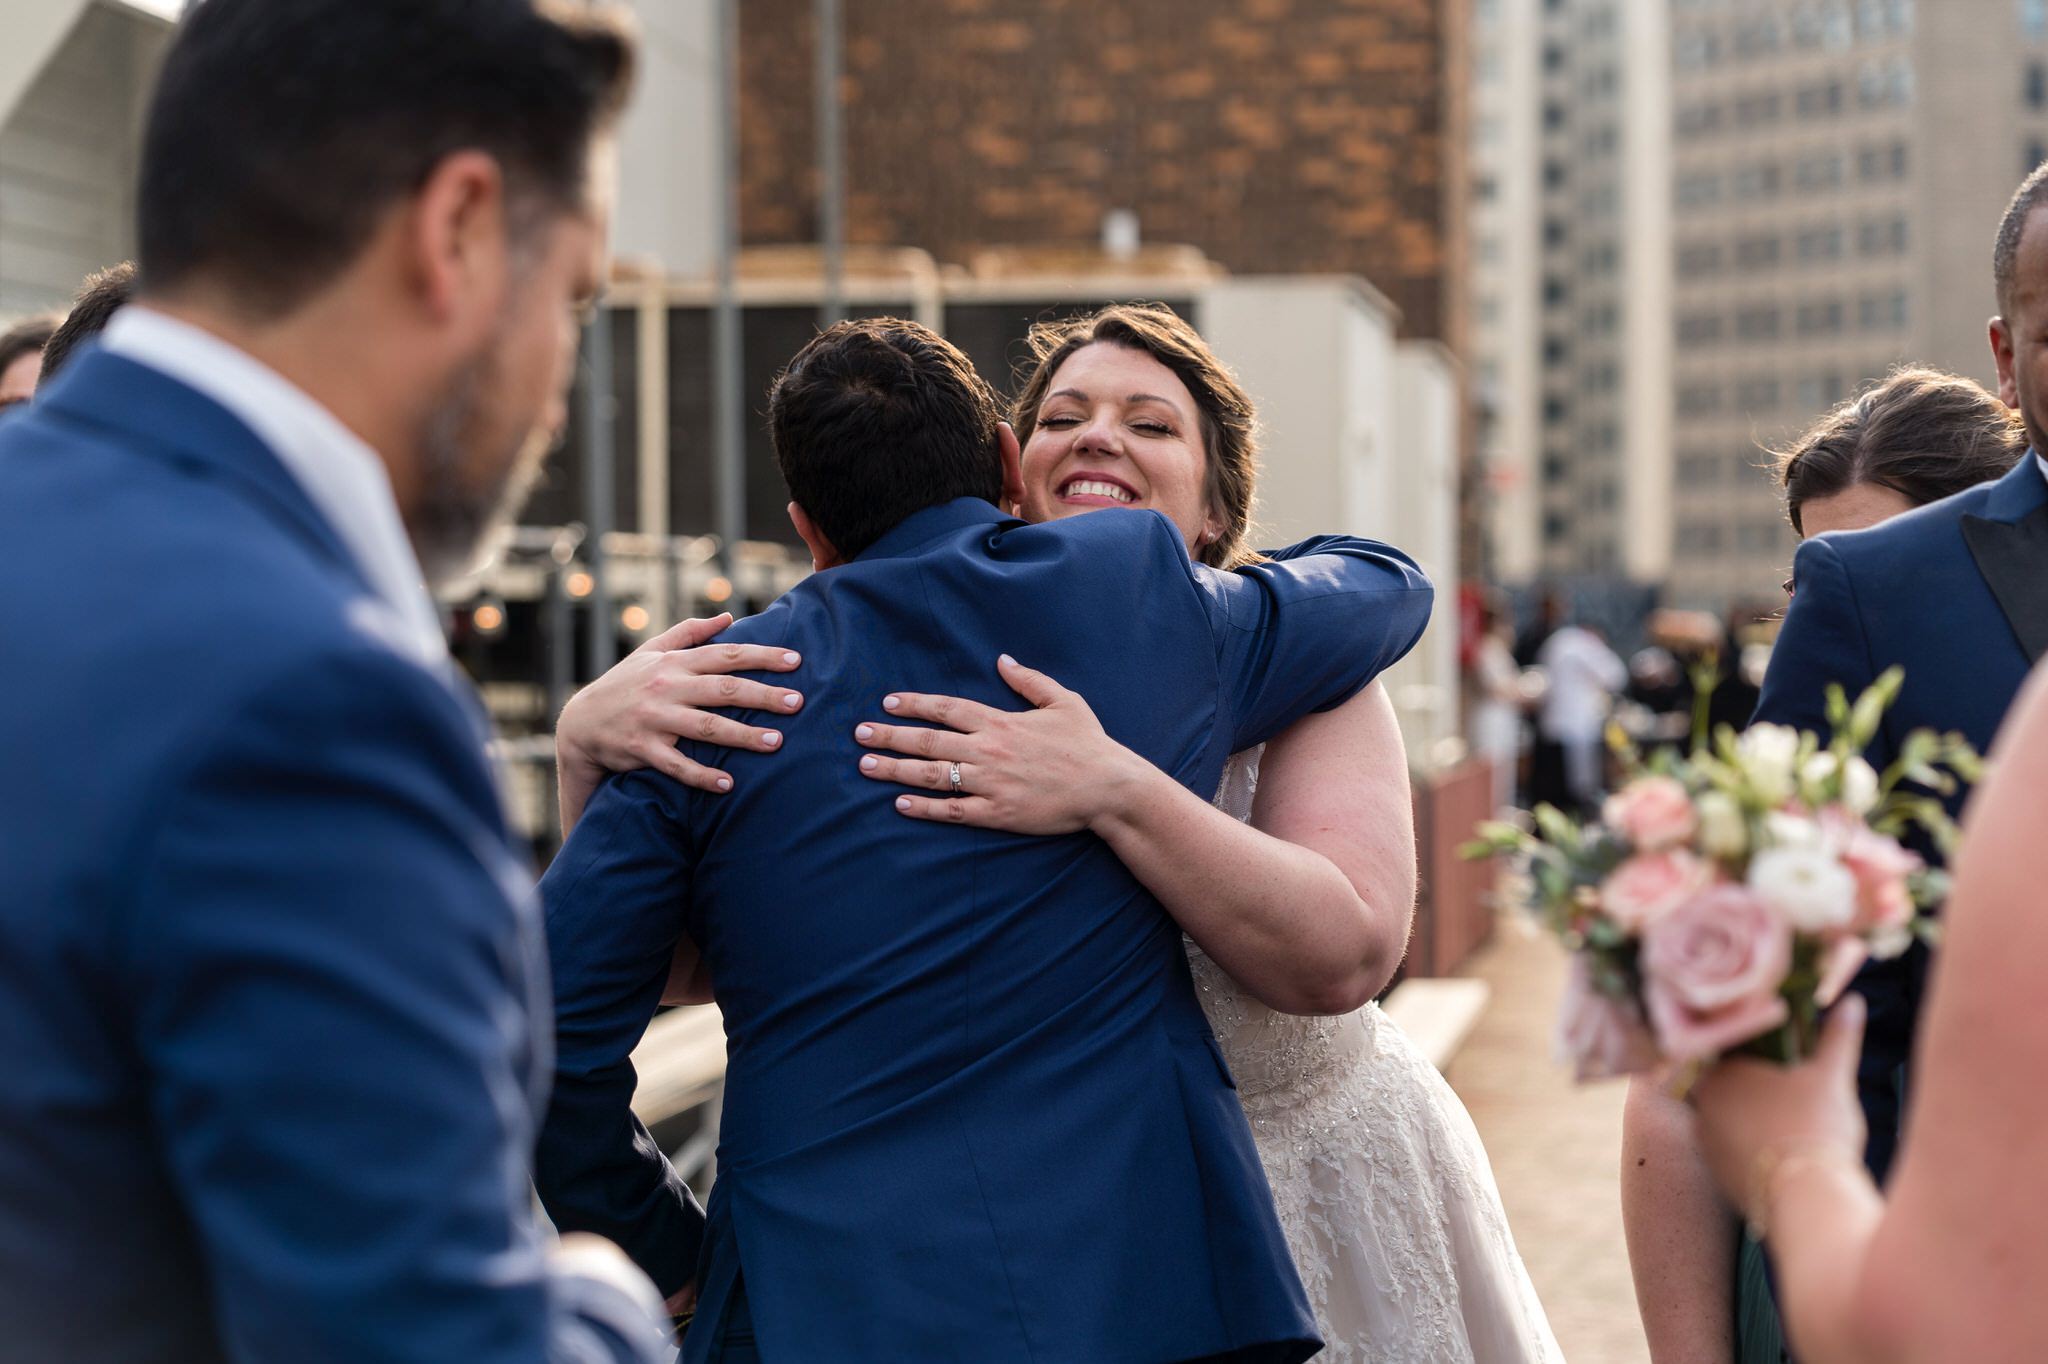  a bride hugs a groomsman after getting married at their rooftop wedding at the Detroit Opera House